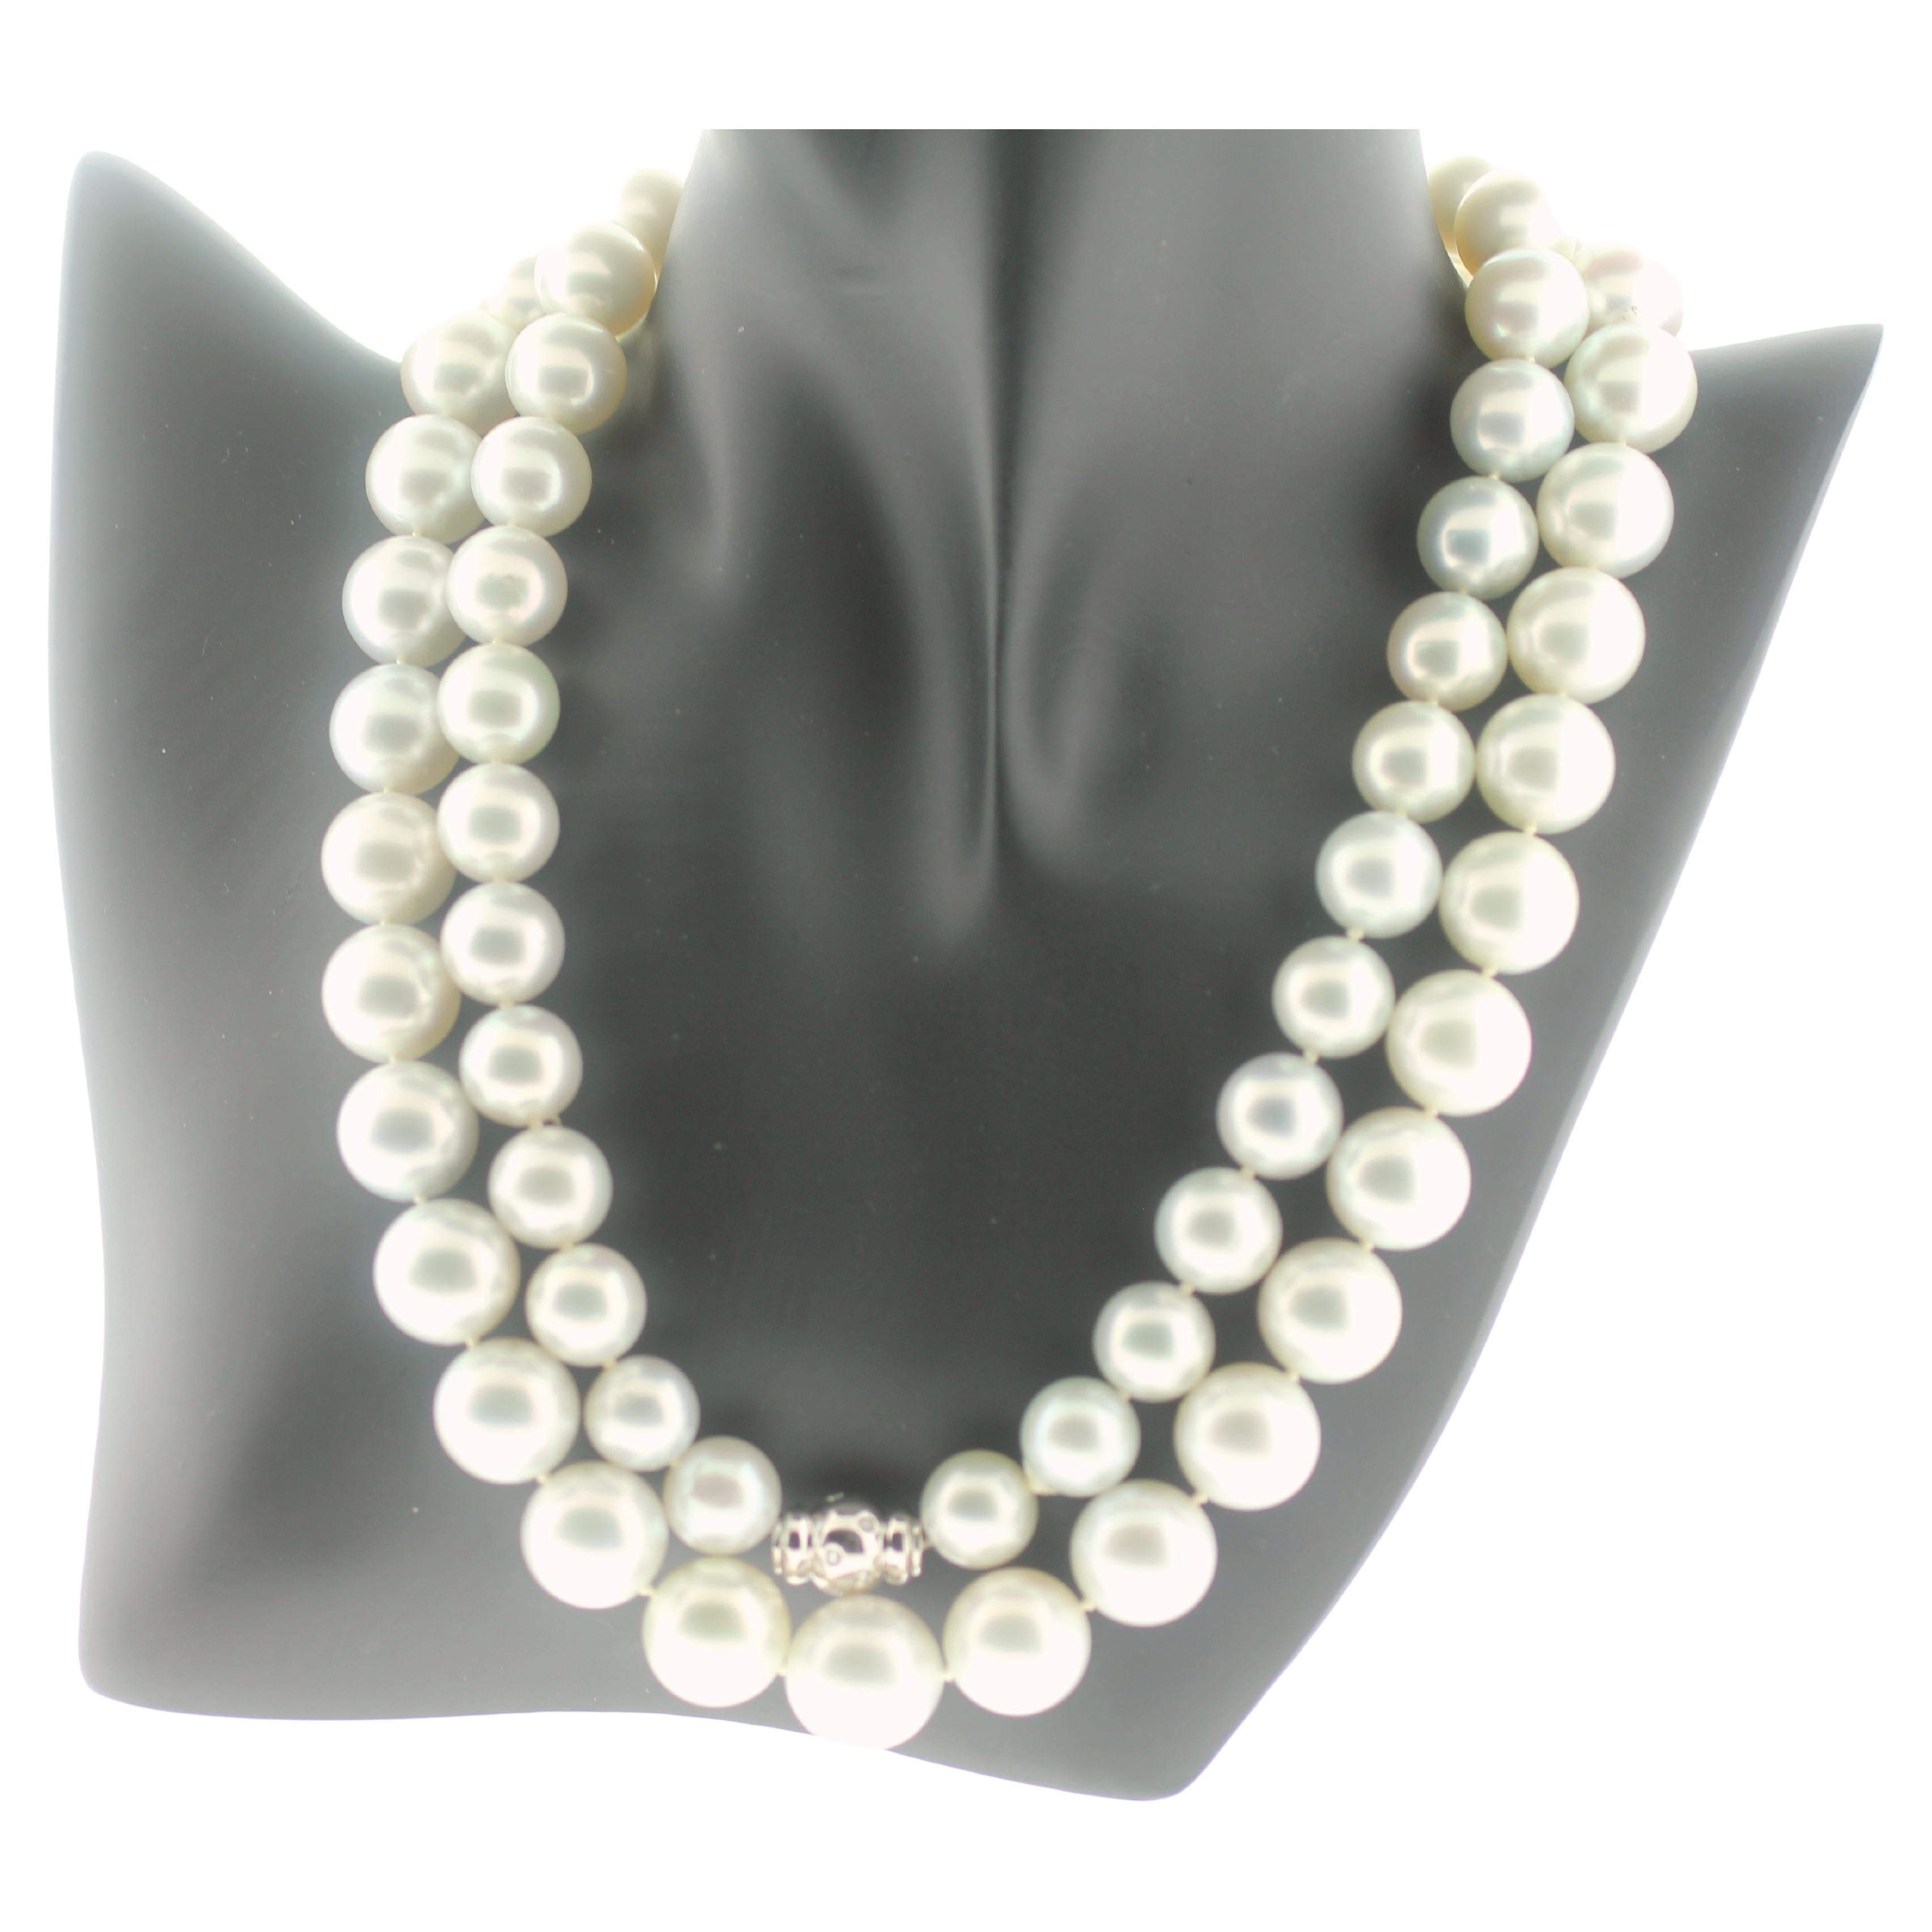 Hakimoto By Jewel Of Ocean 18K South Sea Strand Necklace
18K White Gold  With Diamond Clasp
Weight (g): 214
Cultured South Sea Pearl 
Pearl Size: 15X11mm 
Pearl Shape: Round 
Body color: White 
Orient: Very Good
Luster: Very Good 
Surface: 